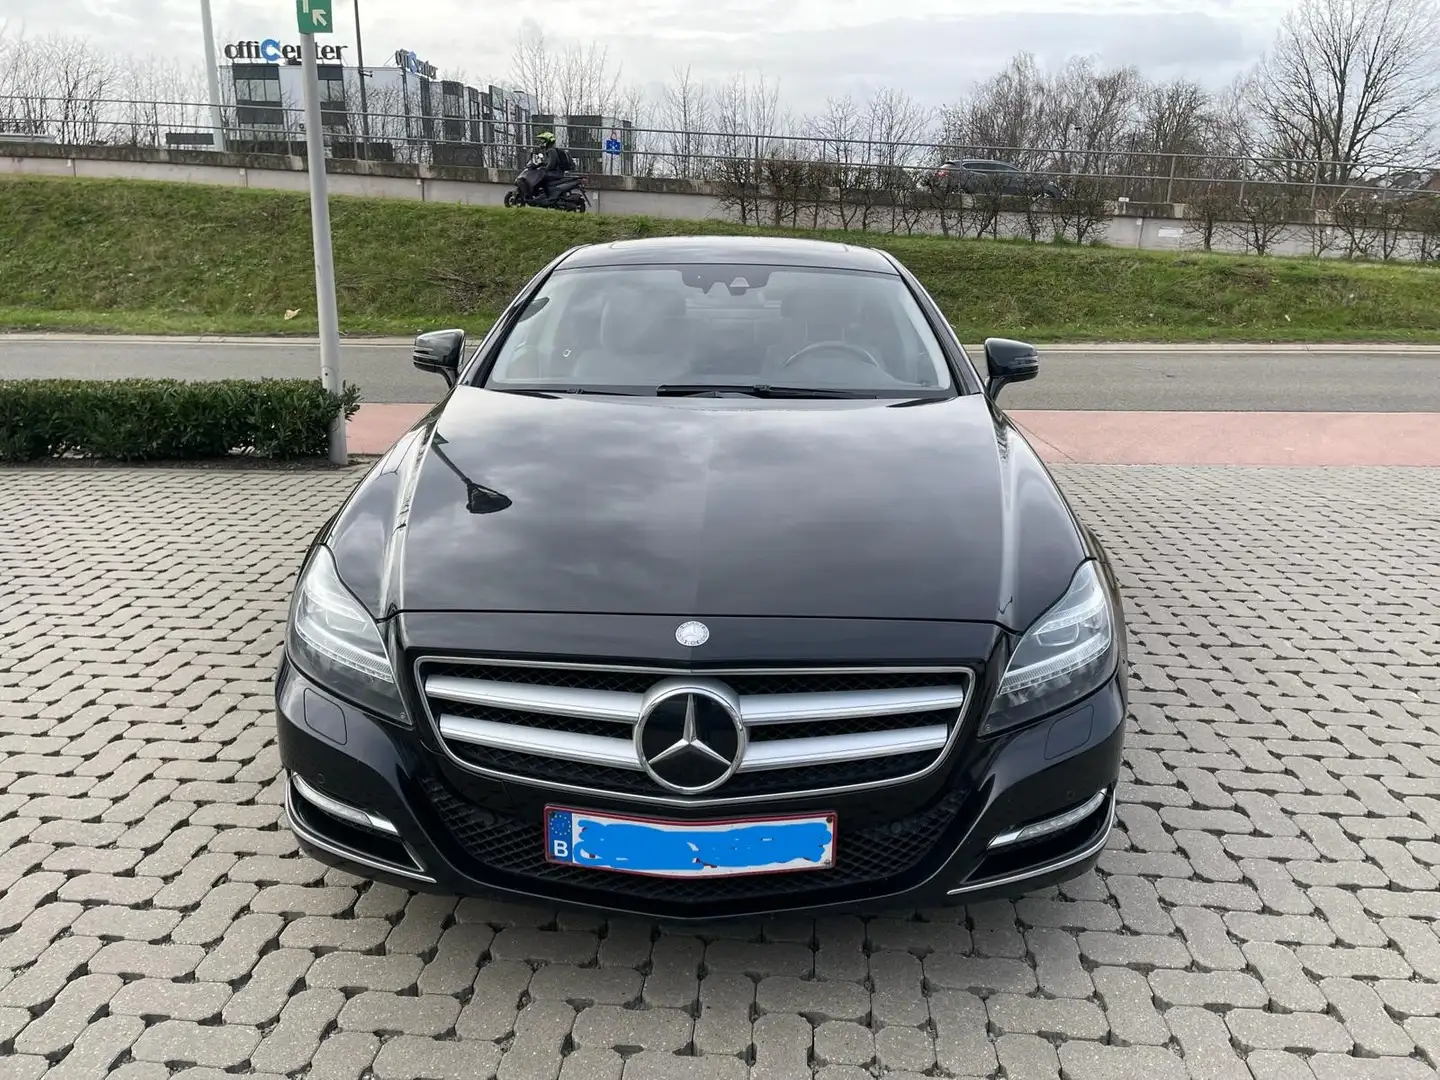 Mercedes-Benz CLS 250 CLS 250 CDI DPF BlueEFFICIENCY 7G-TRONIC Edition 1 crna - 2